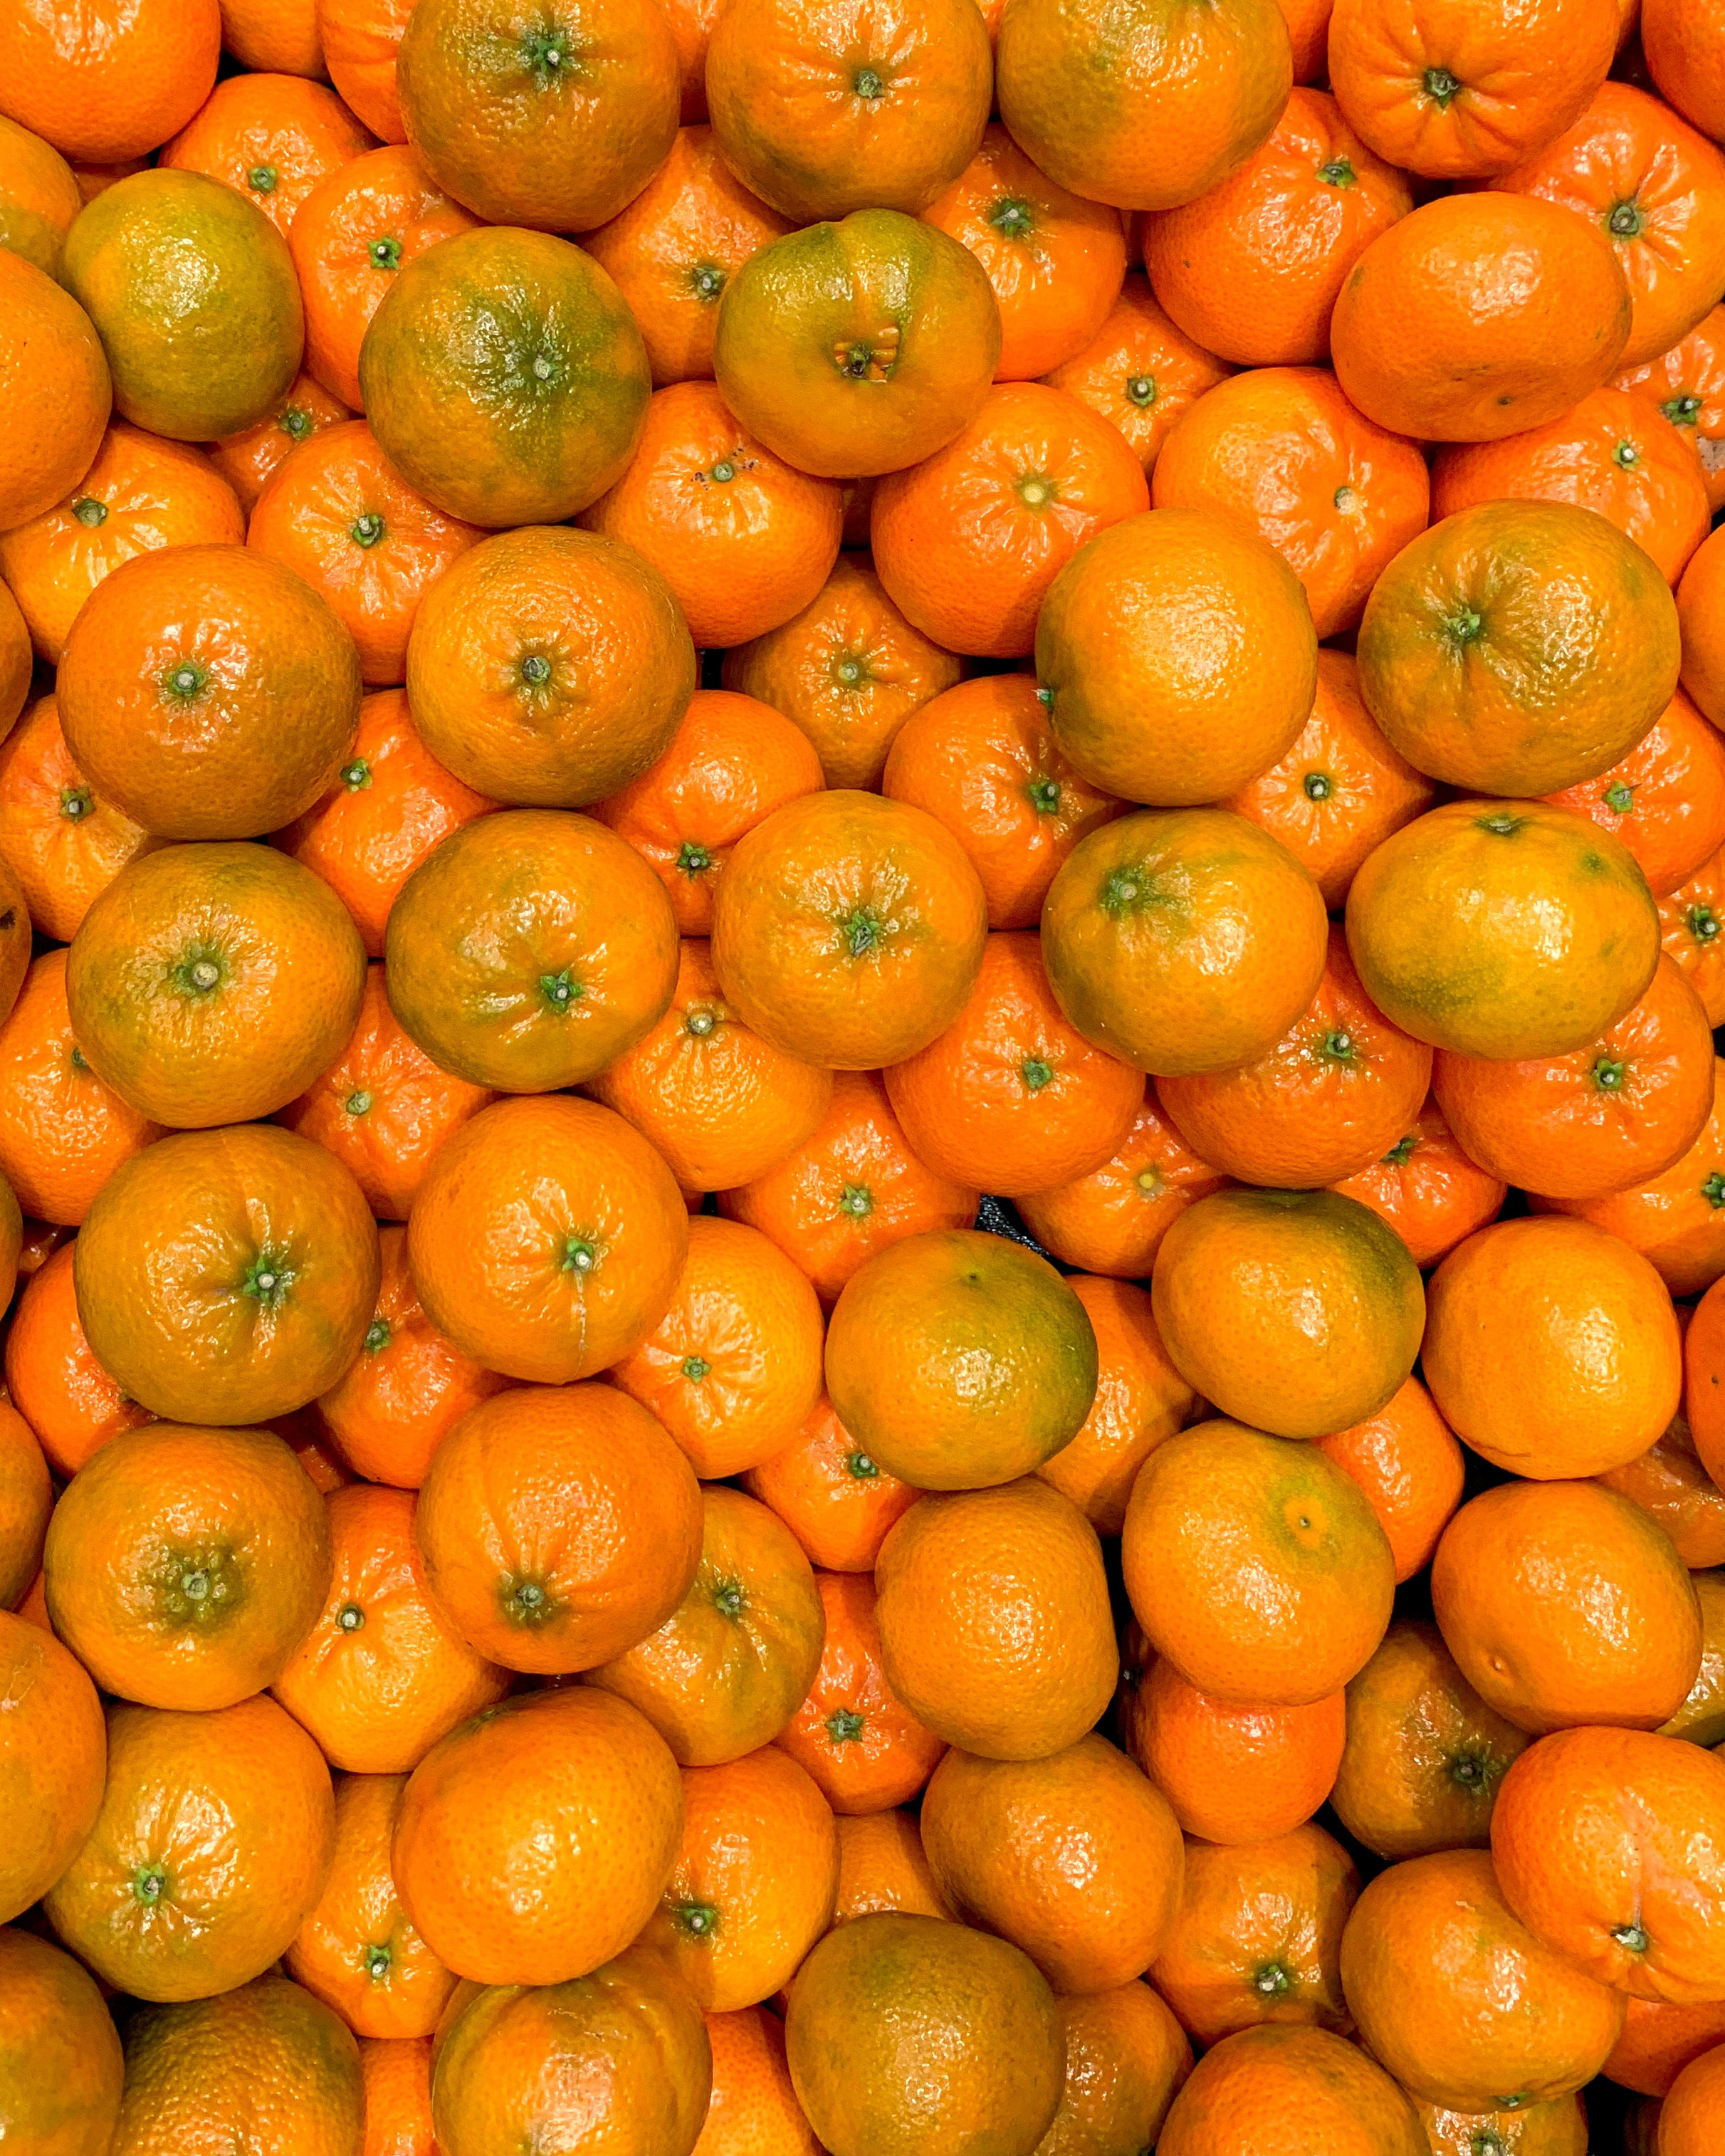 Newest Mobile Wallpaper Tangerines